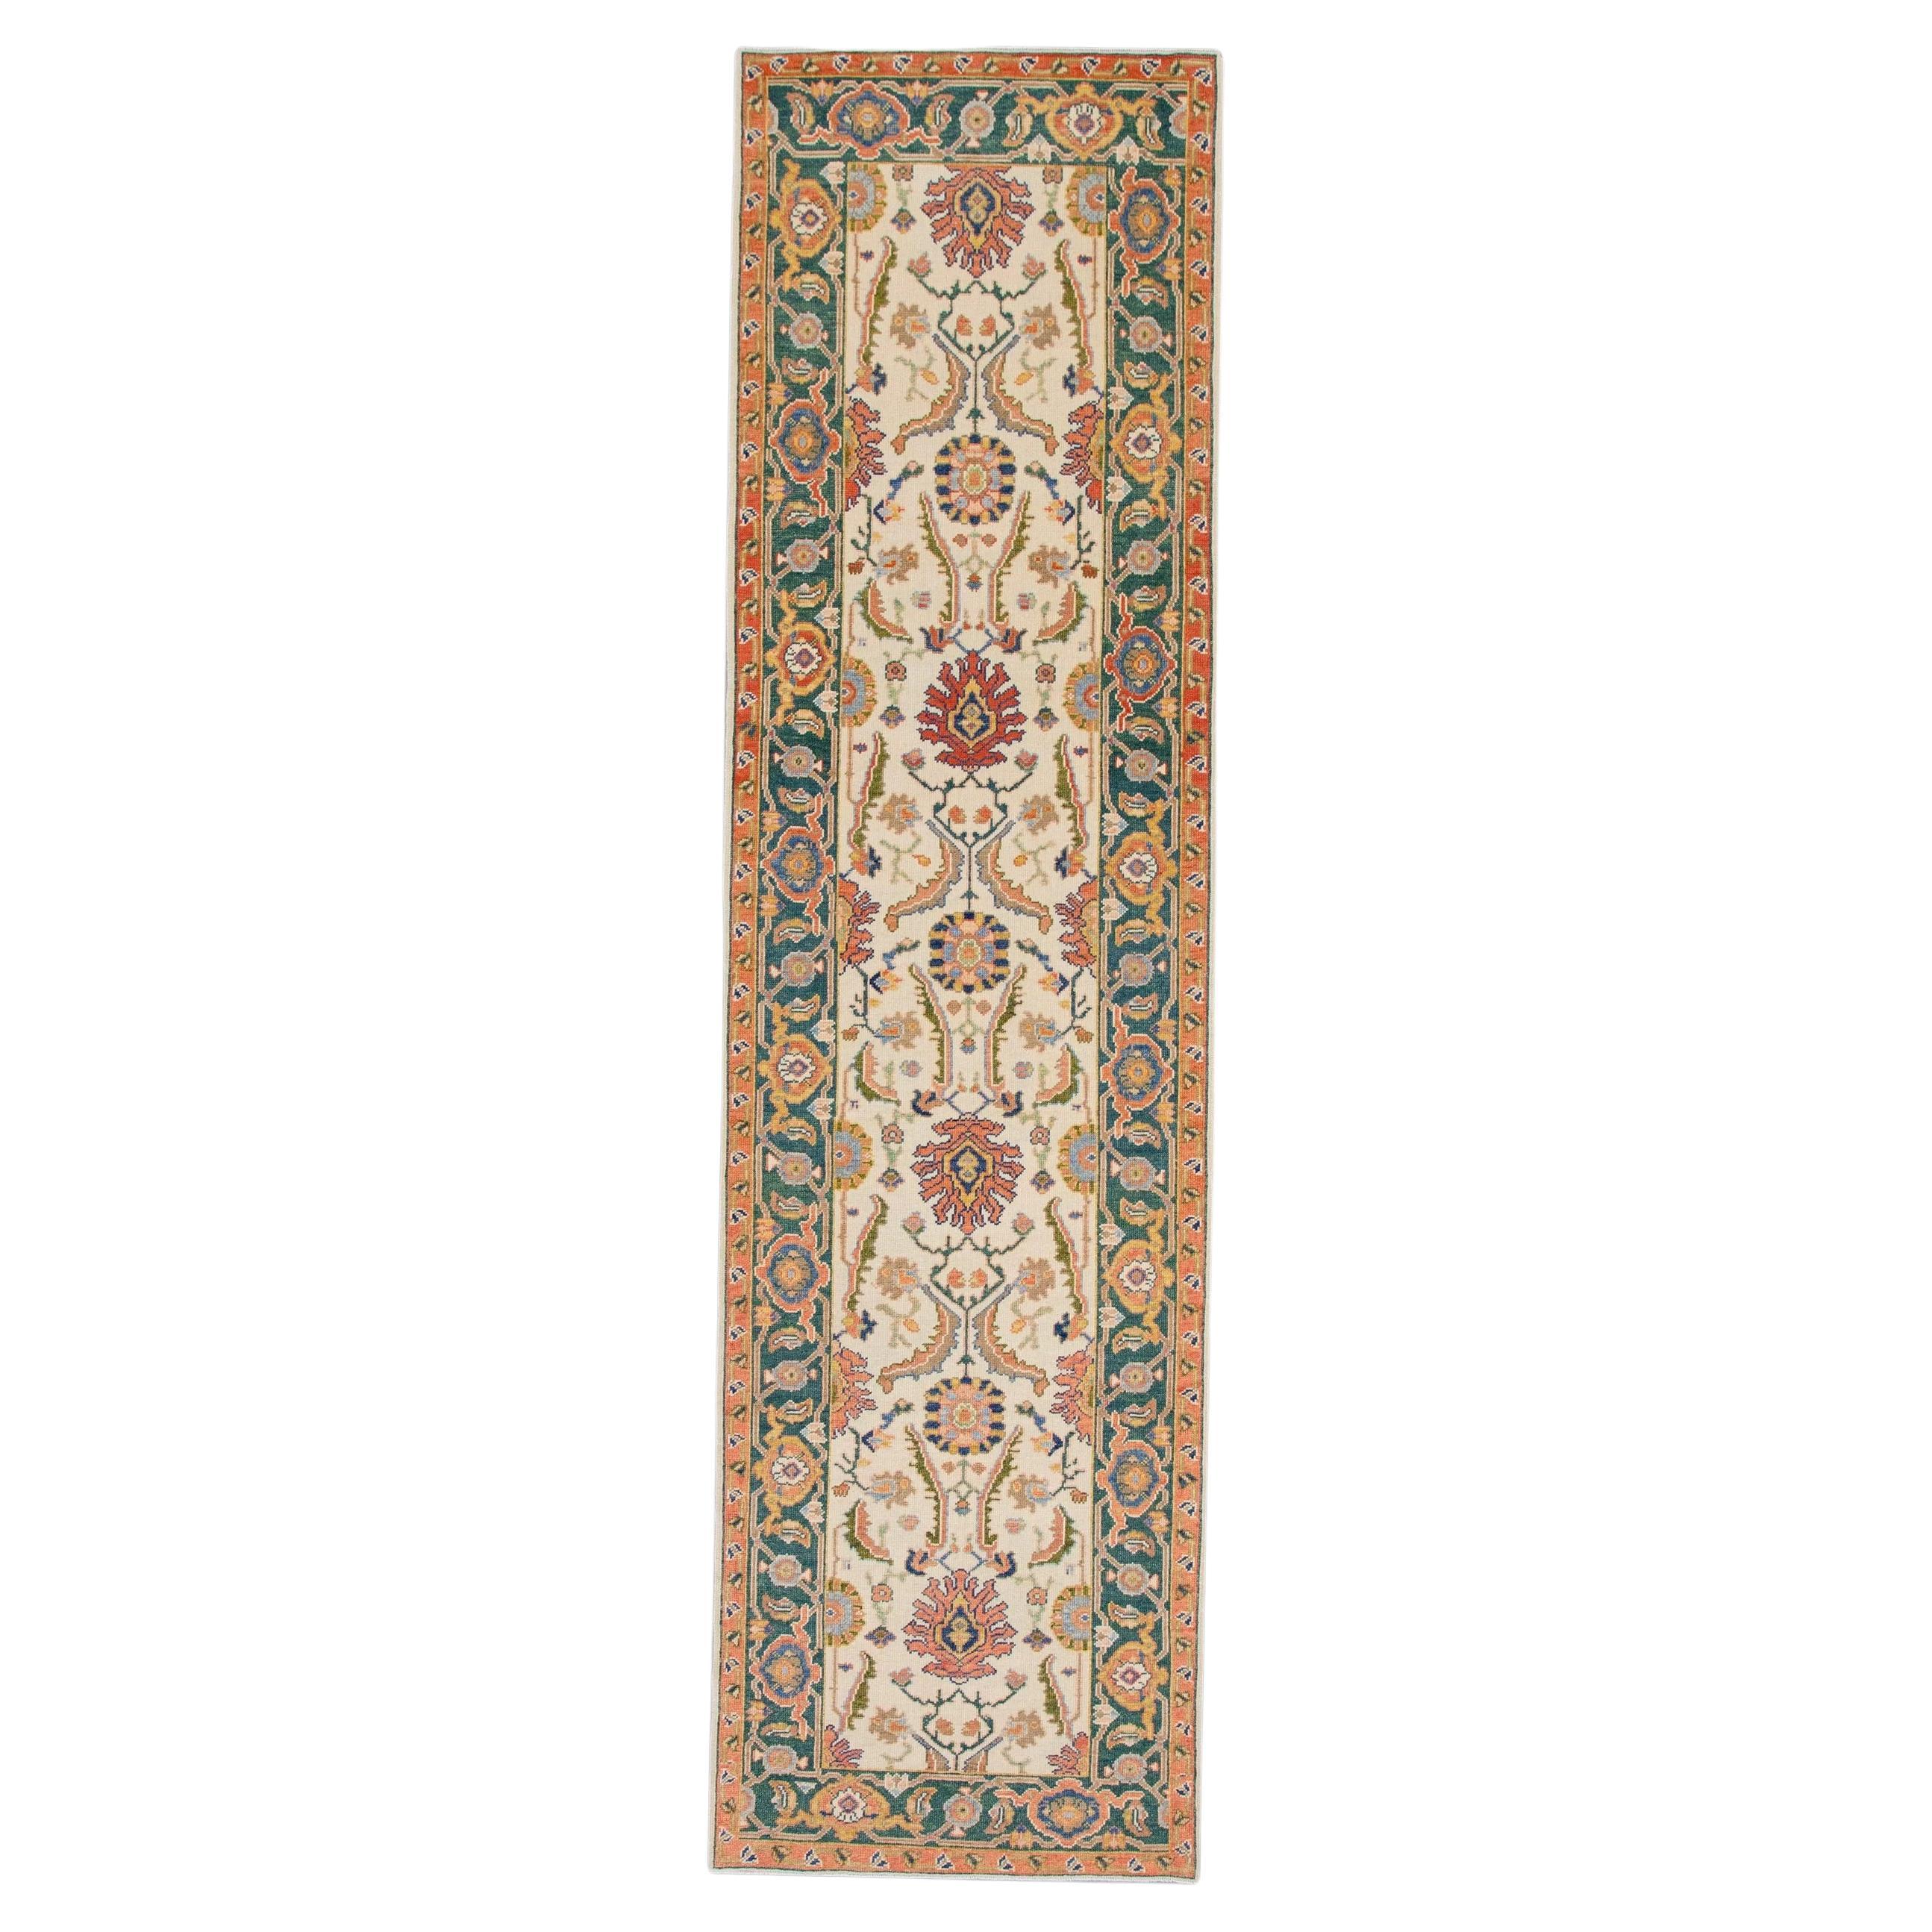 Floral Turkish Finewoven Wool Oushak Rug in Cream, Green, and Red 2'9" x 10'5" For Sale